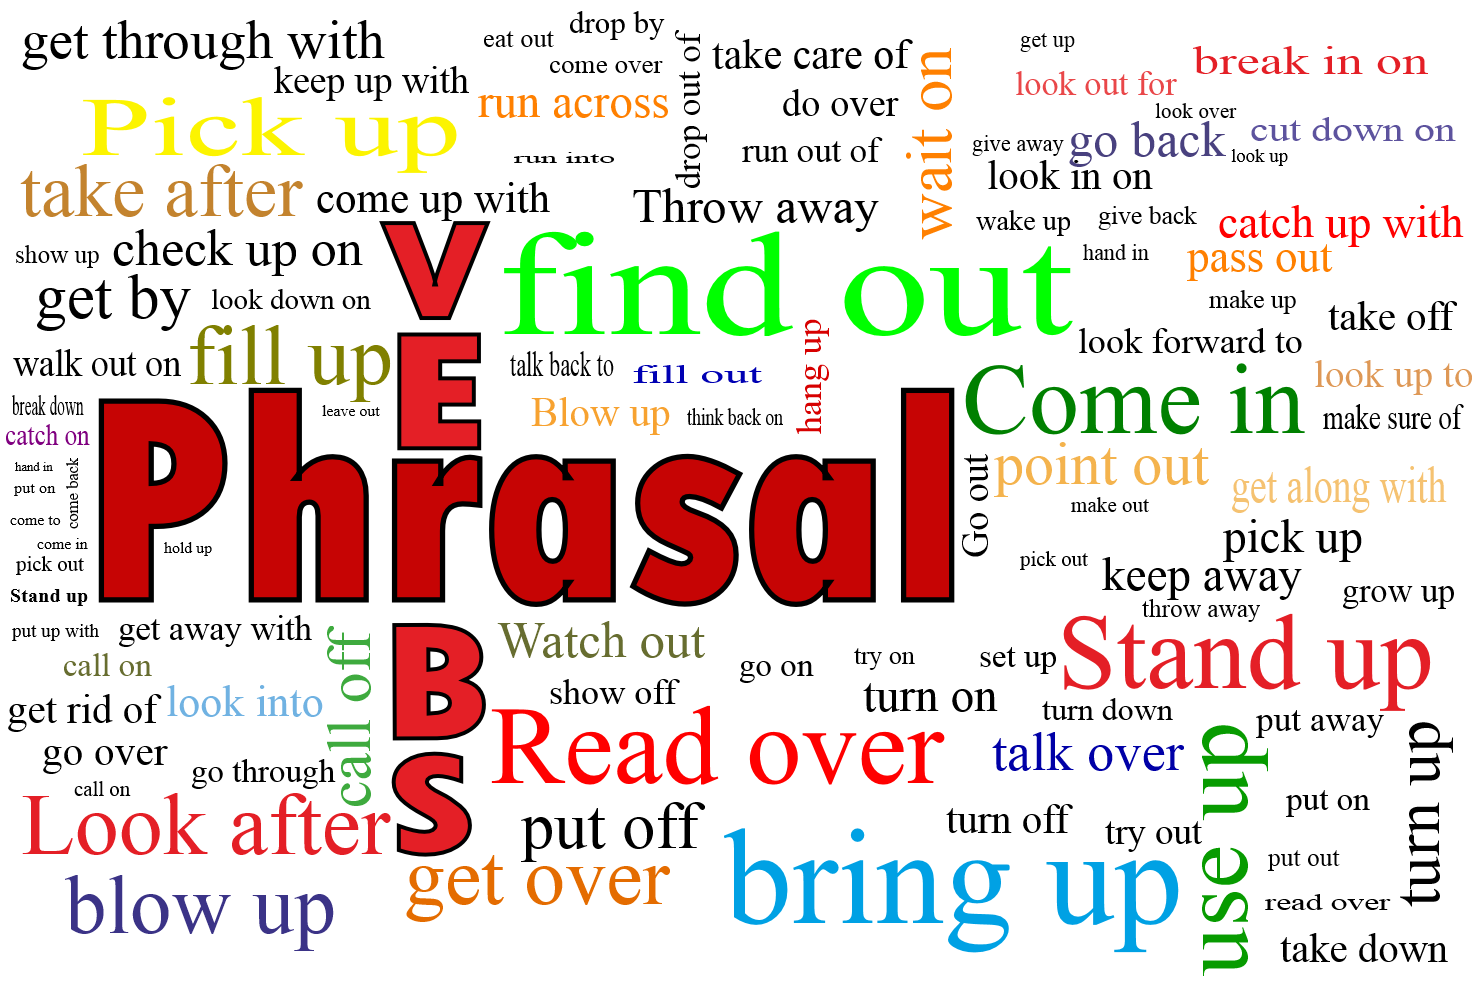 Phrasal Verbs With 'Draw' - Word Coach